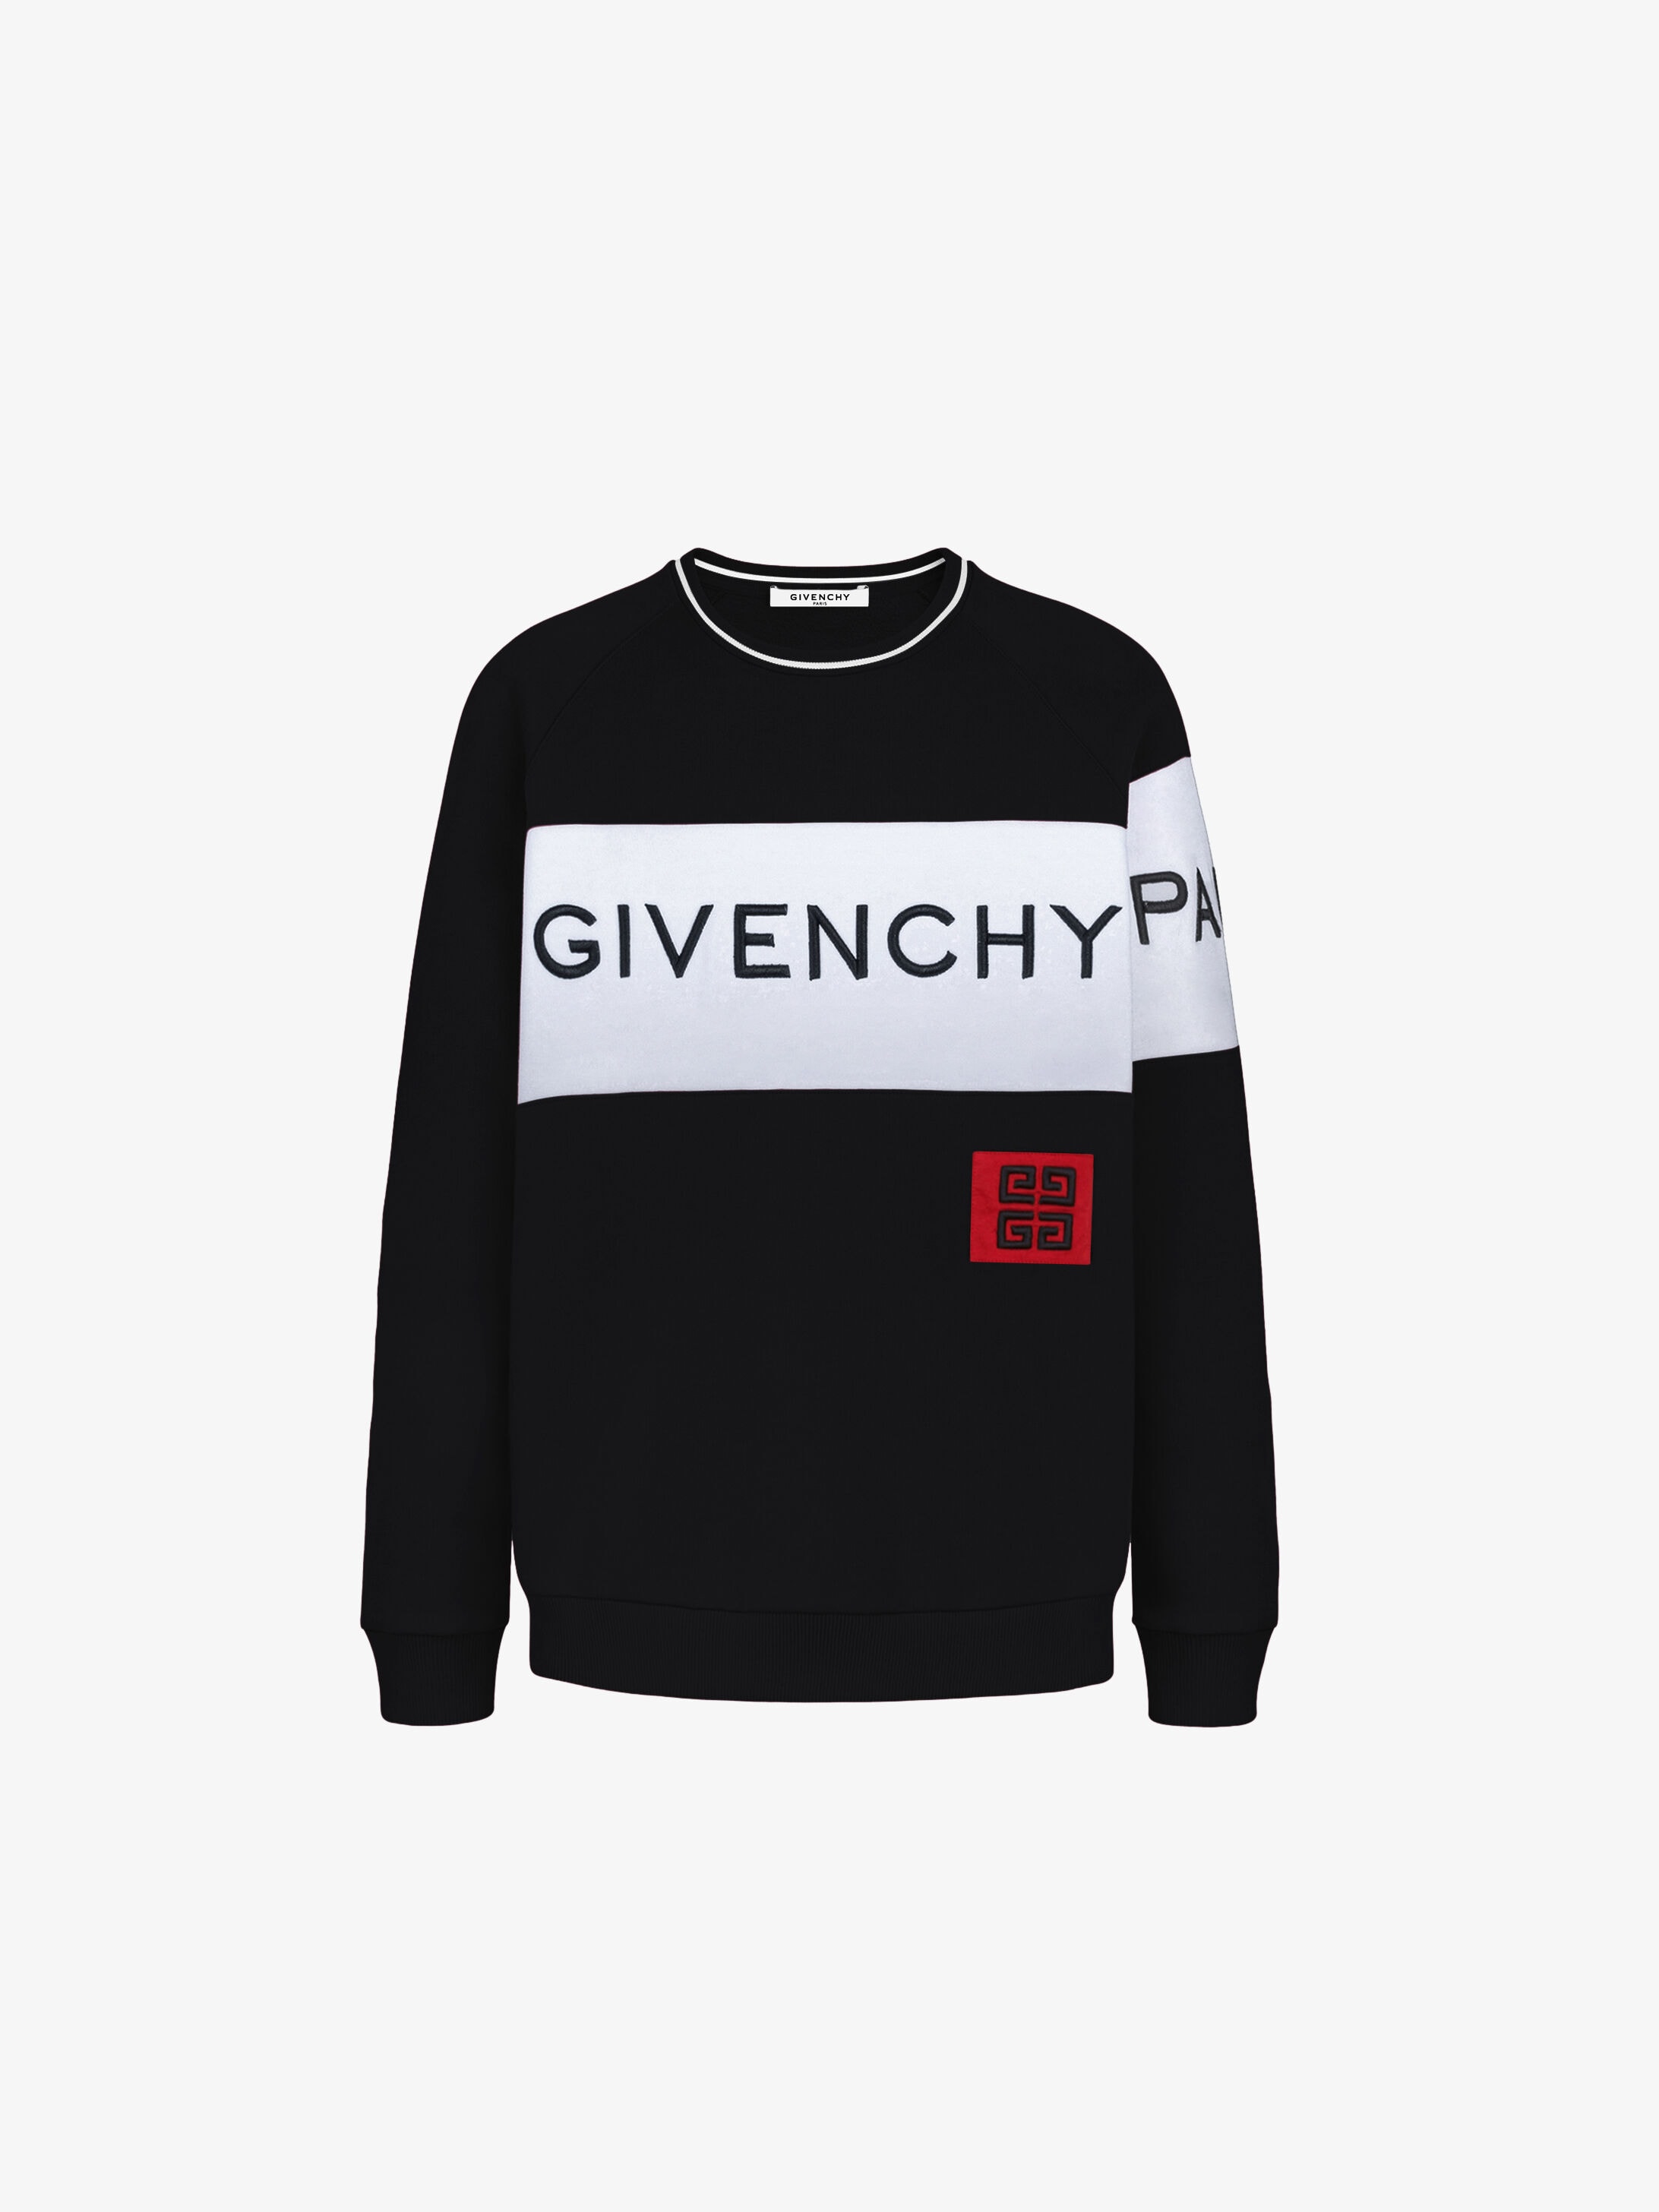 givenchy women jumper